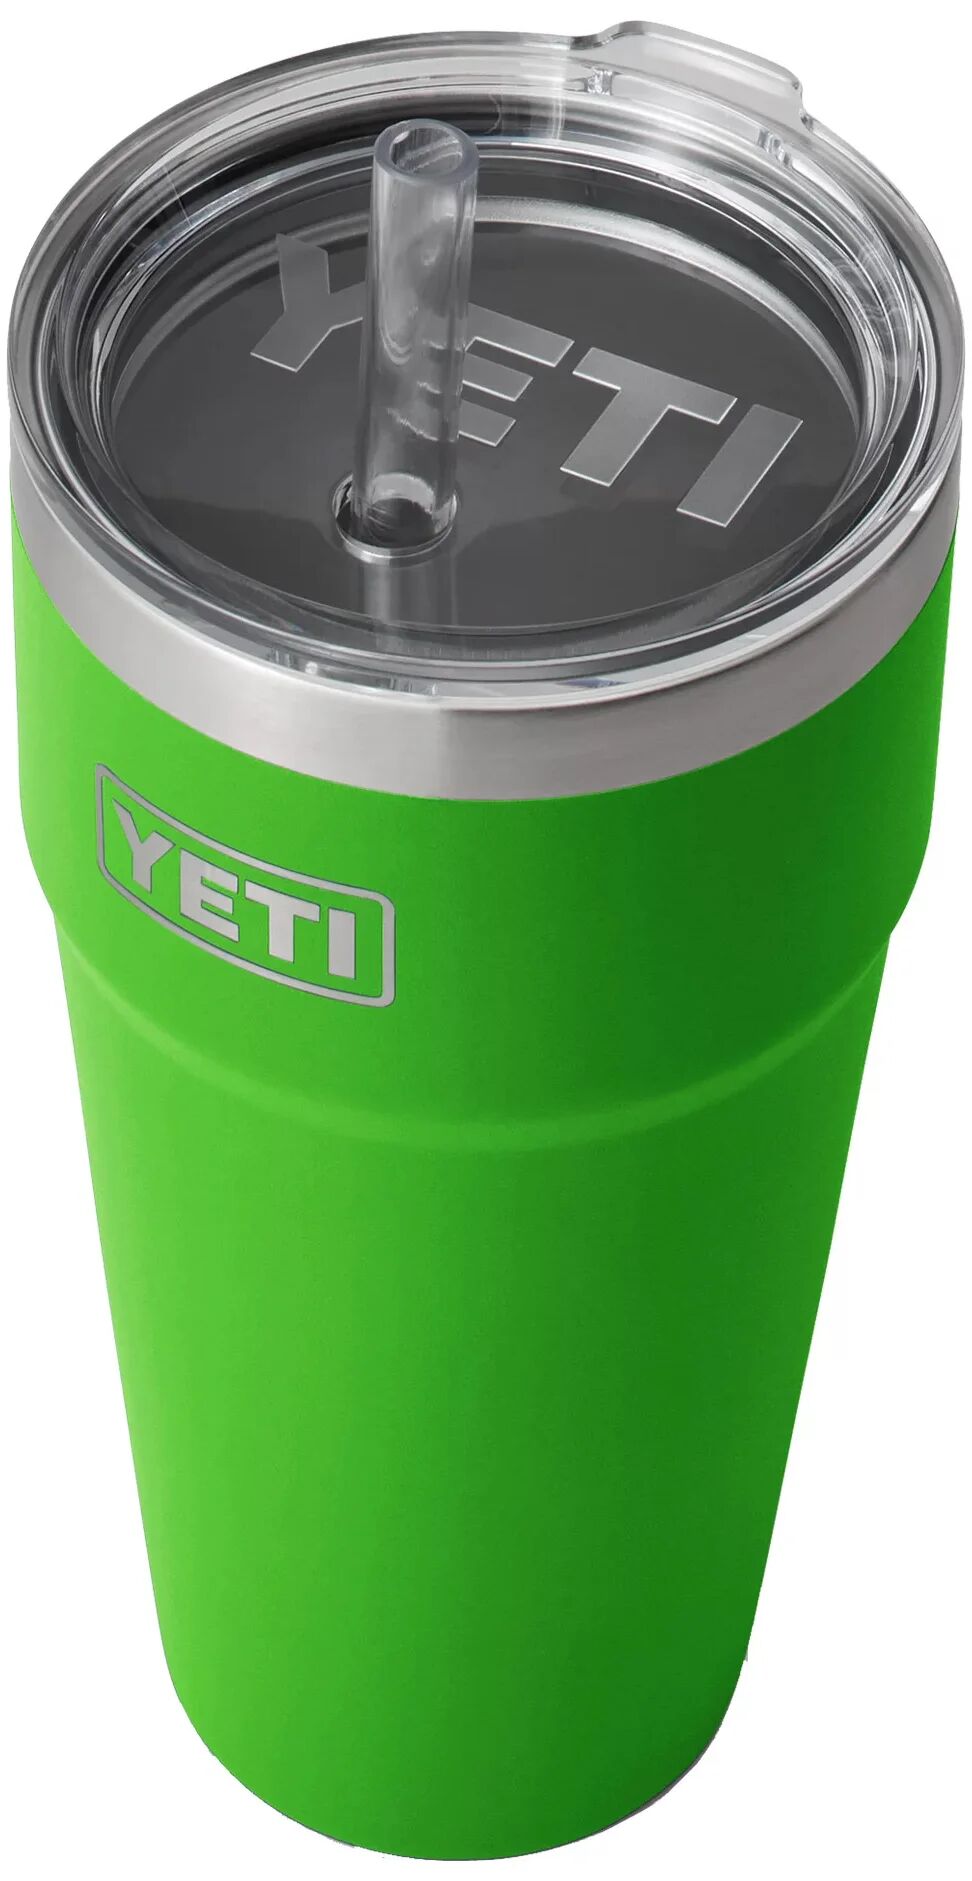 Yeti Coolers YETI Rambler 26 oz. Stackable Cup With Straw Lid